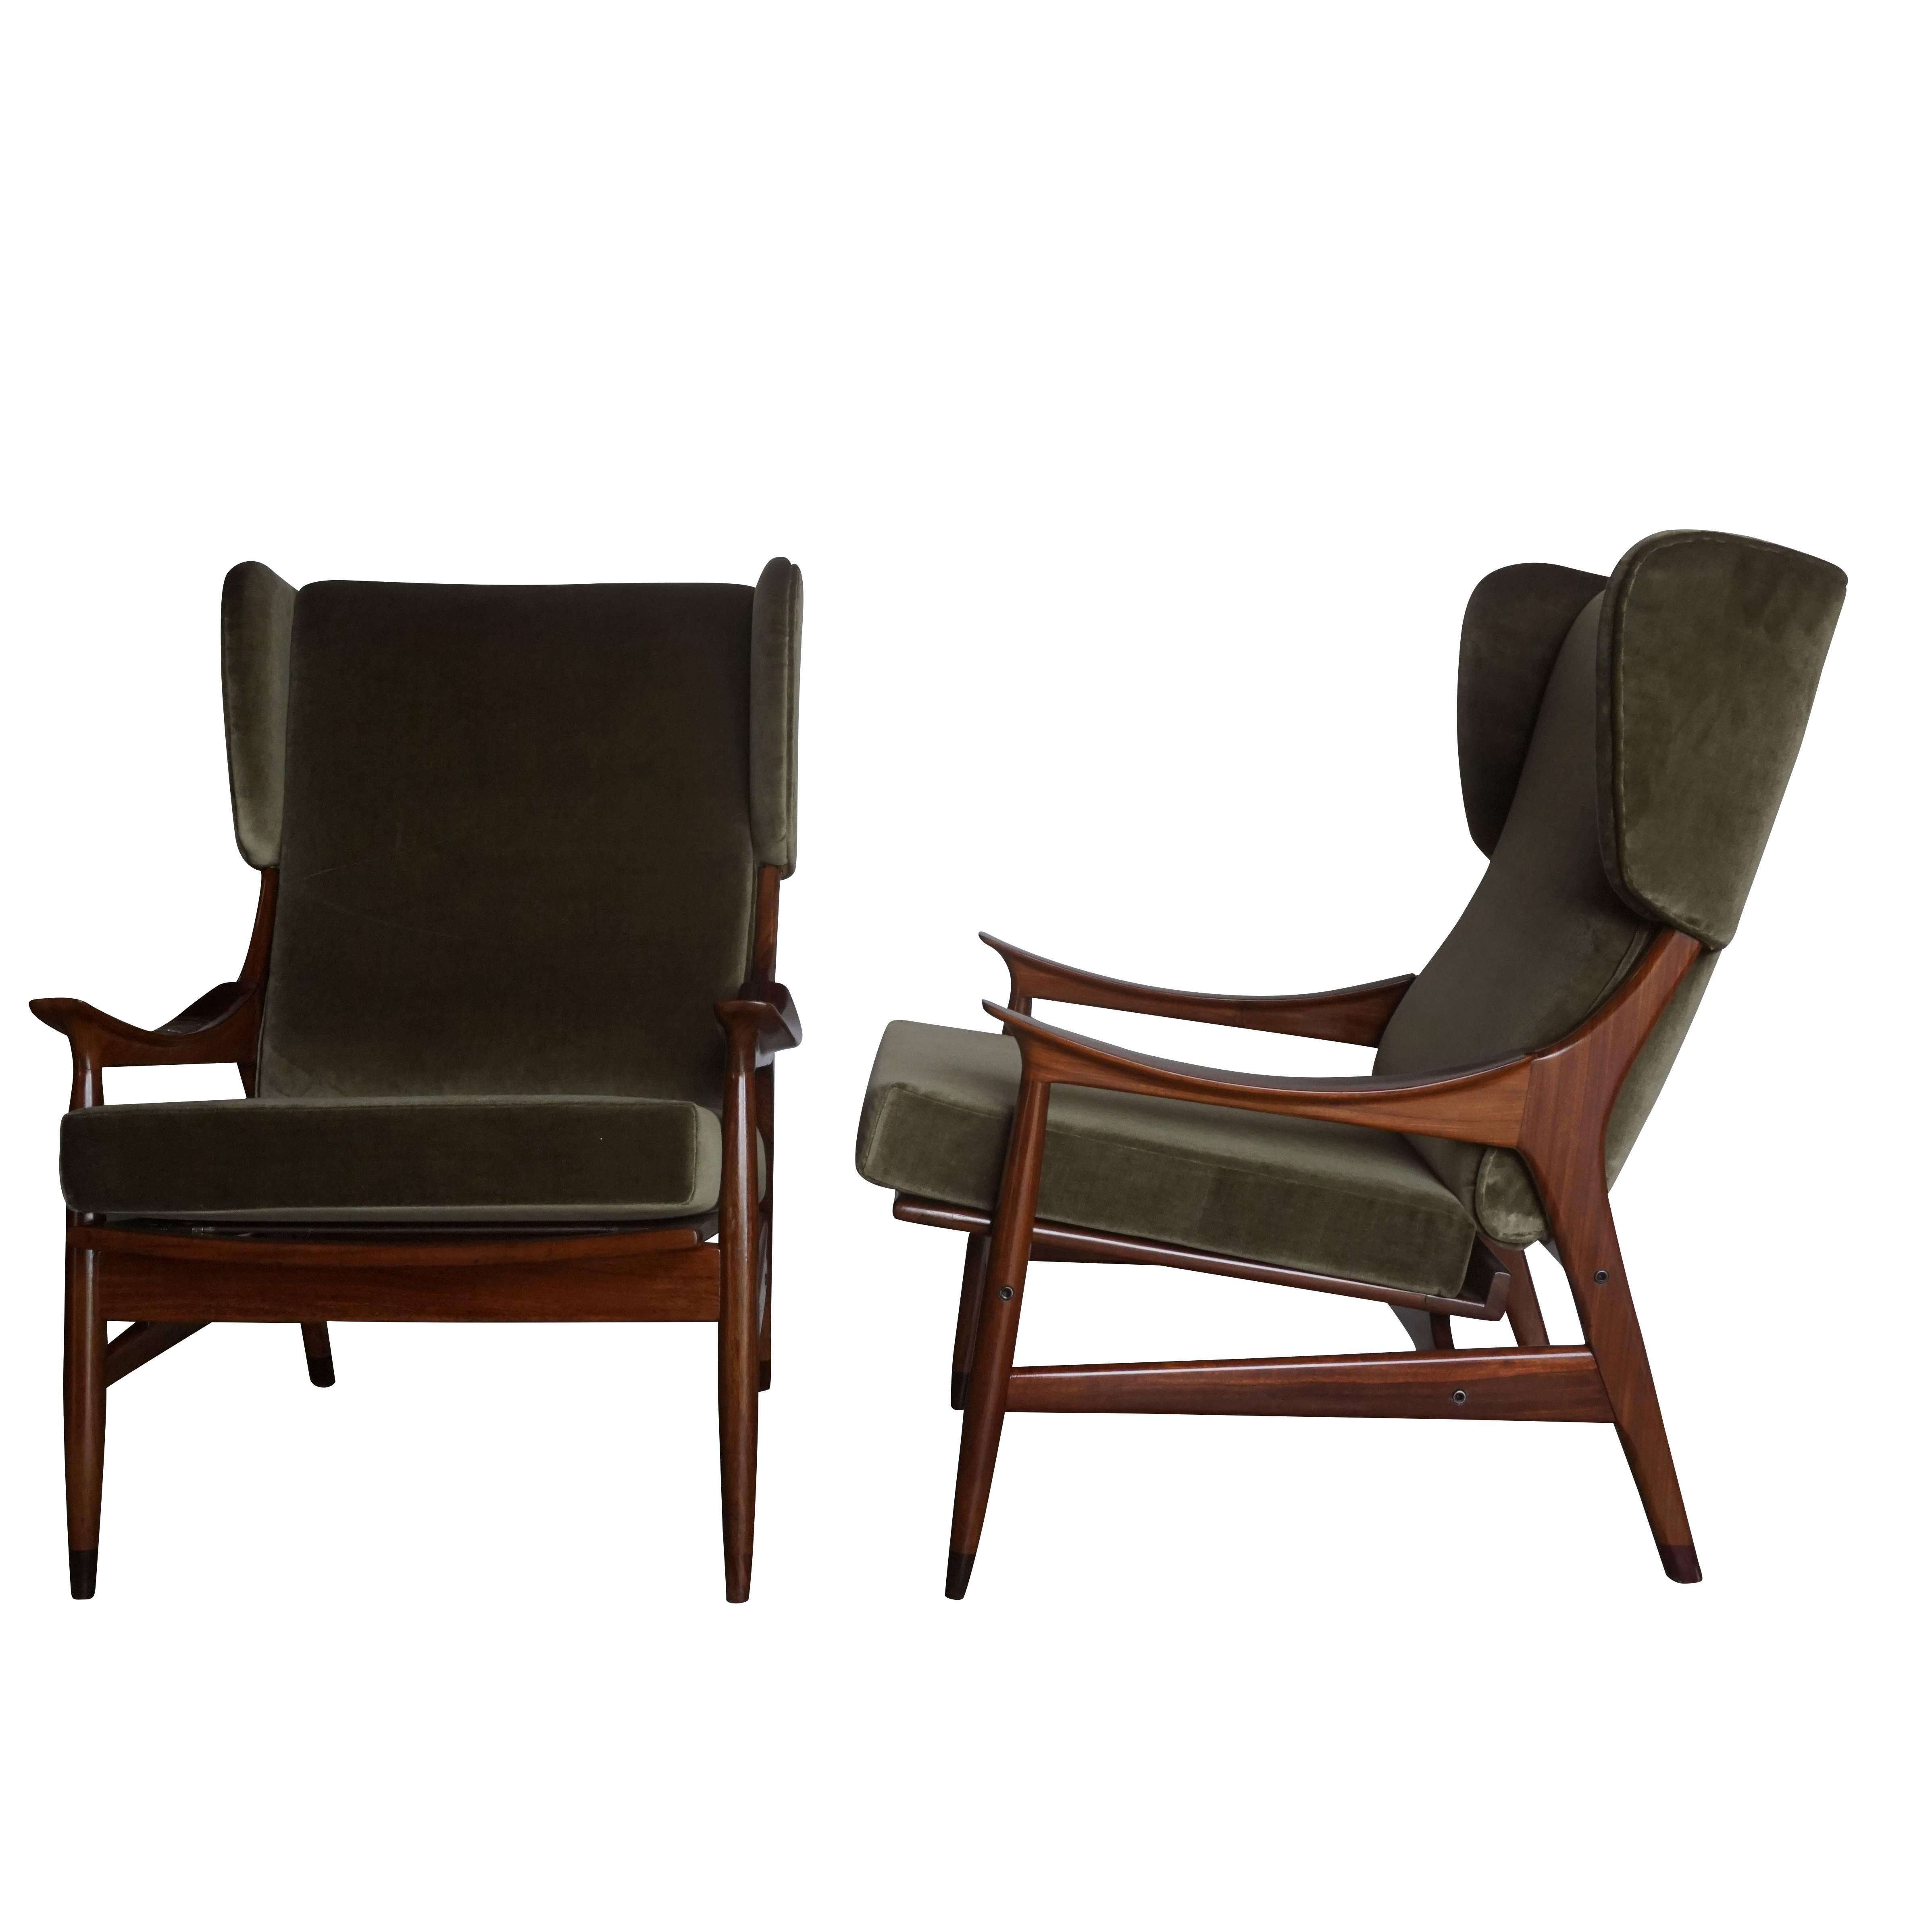 Mid-Century Modern, a pair of Danish teak wingback chairs made of rosewood and green velvet upholstery, 17.5 inch seat height, Scandinavia.